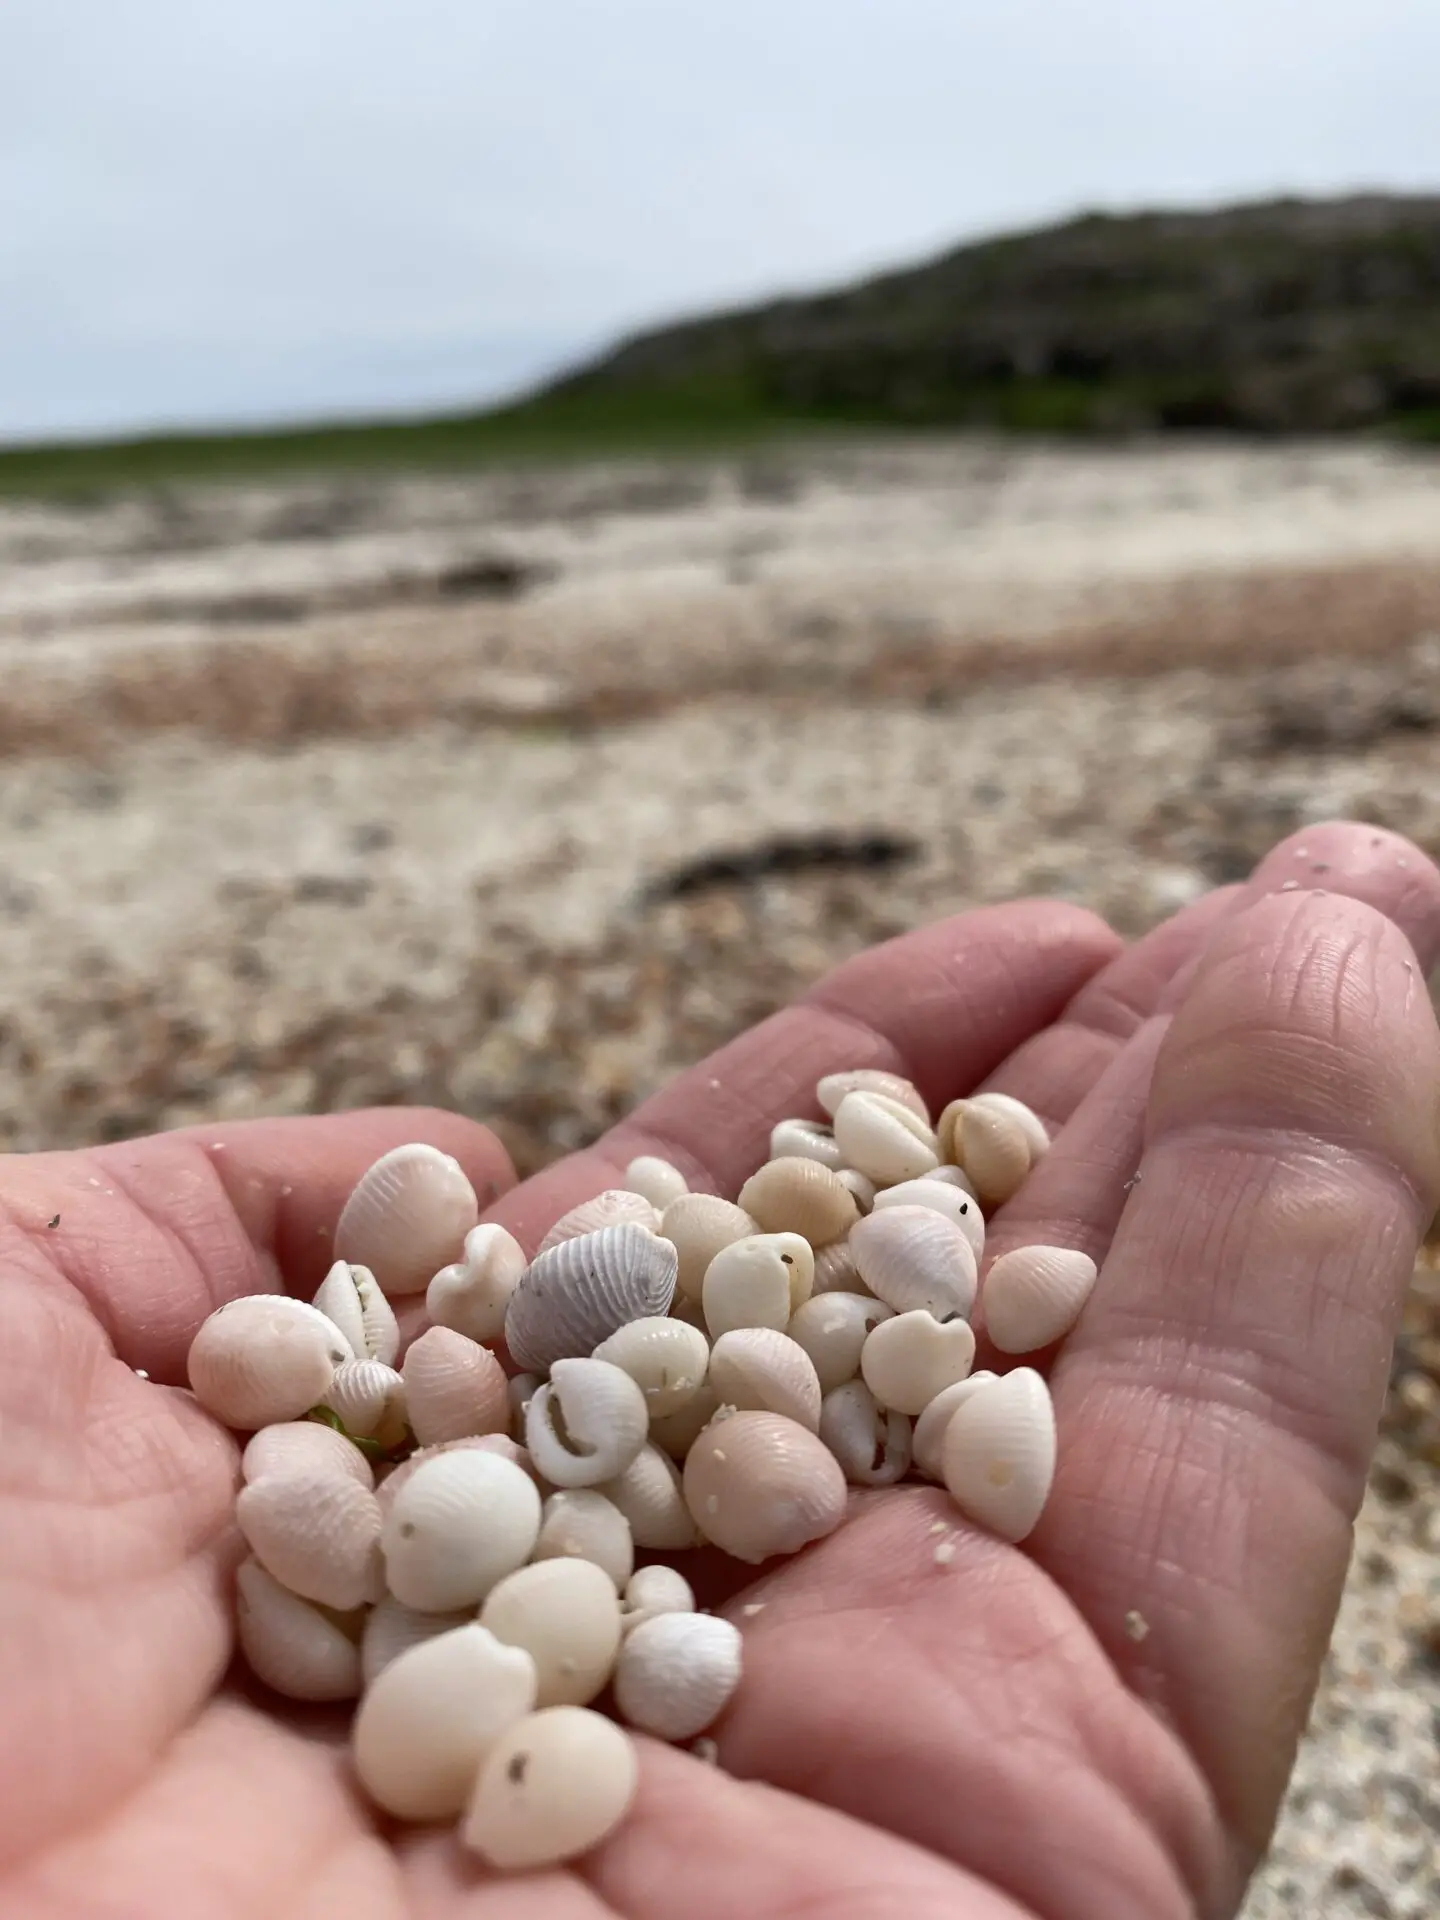 Cowrie shells in a hand